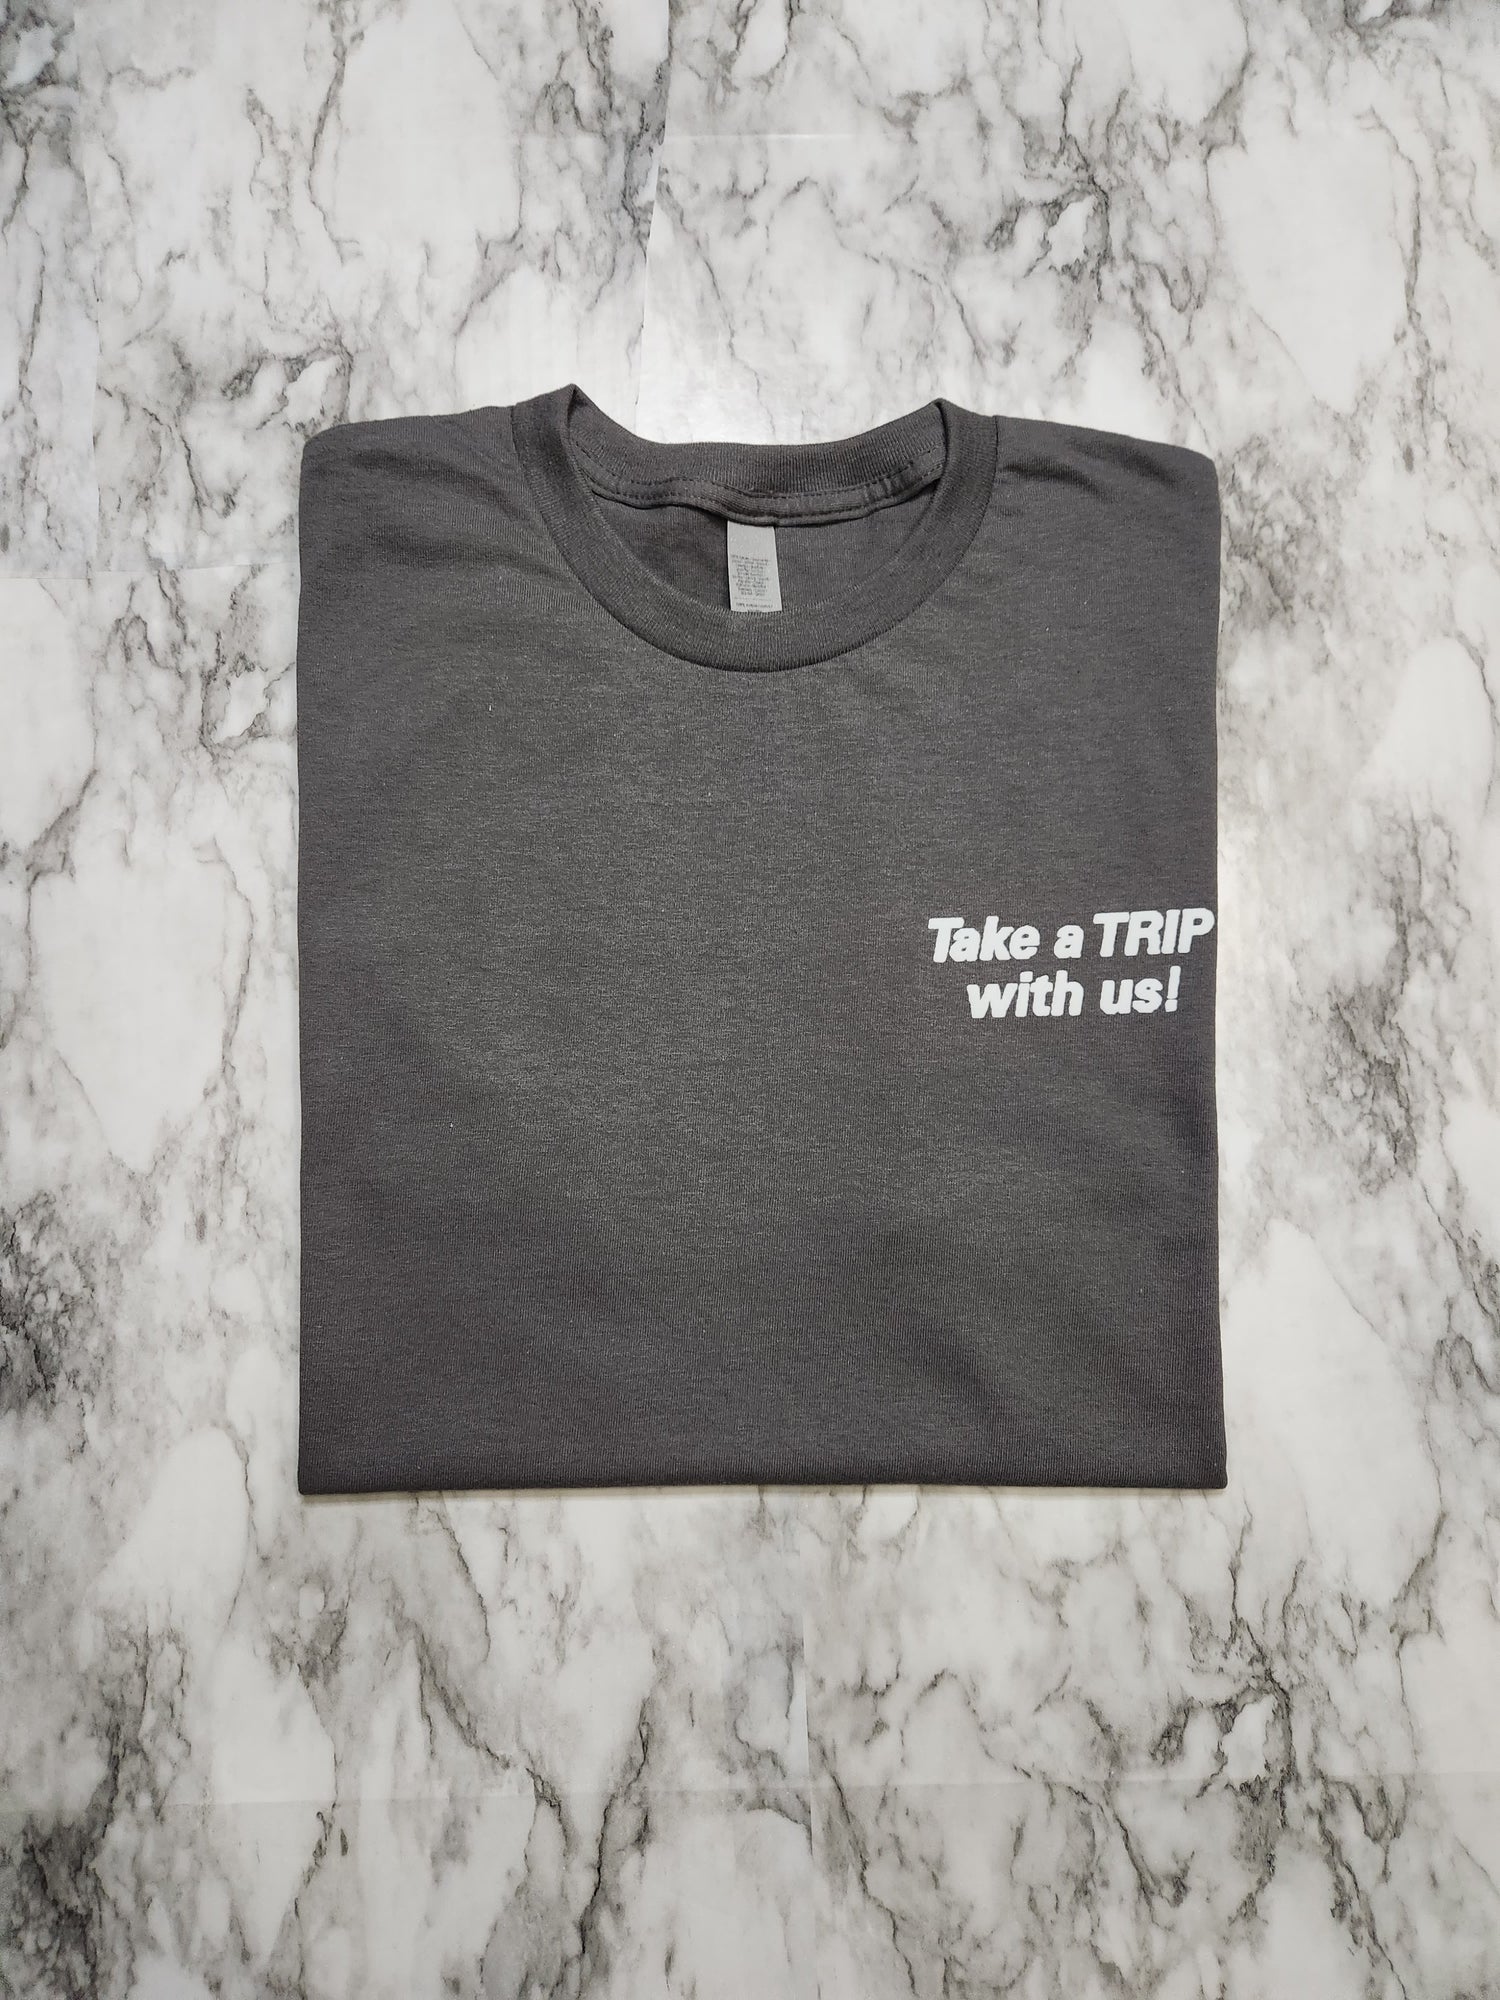 Take A Trip T-Shirt - Centre Ave Clothing Co.